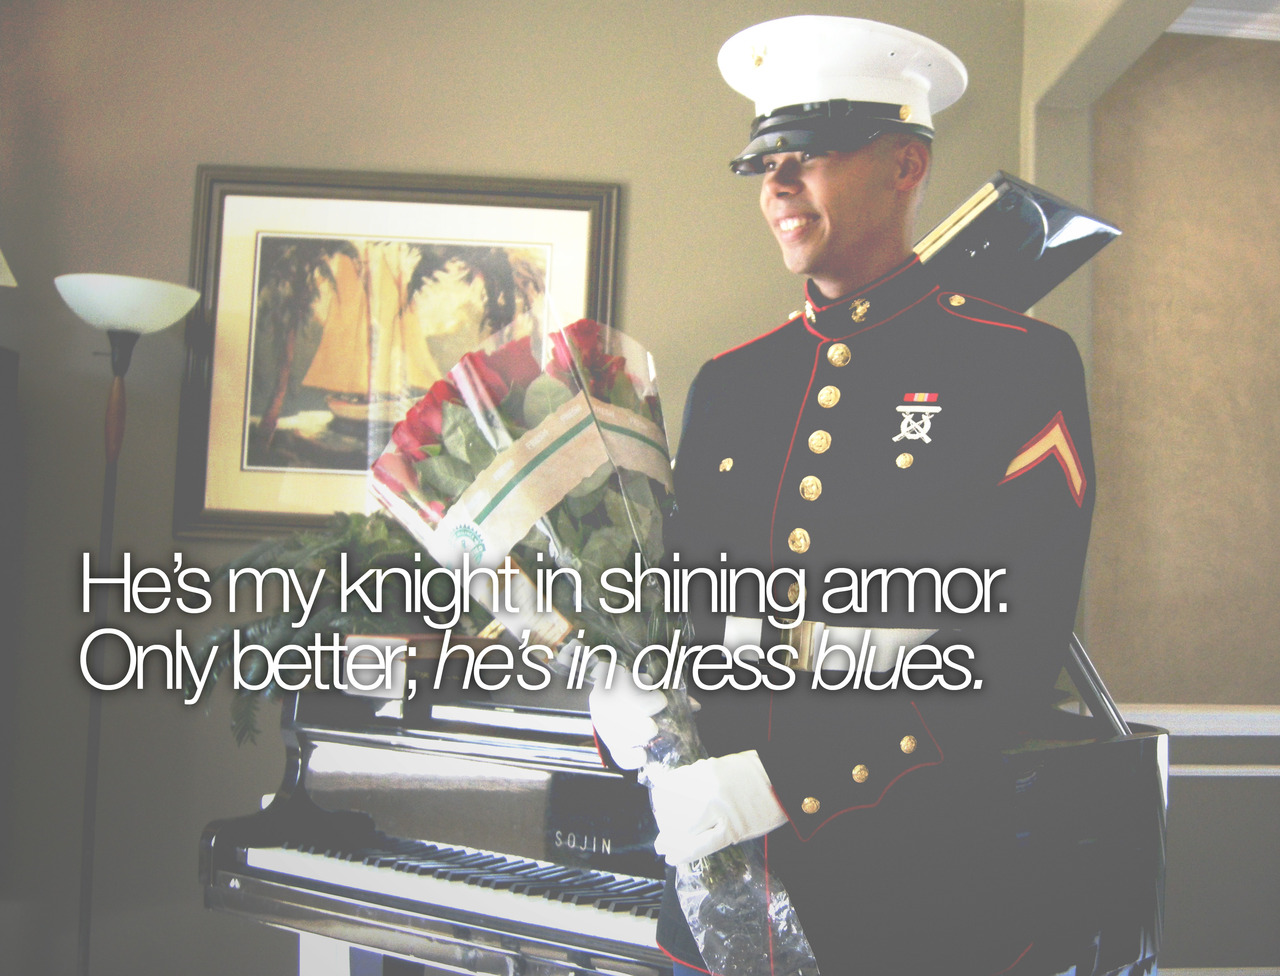 Marine Pictures With Quotes Wallpapers